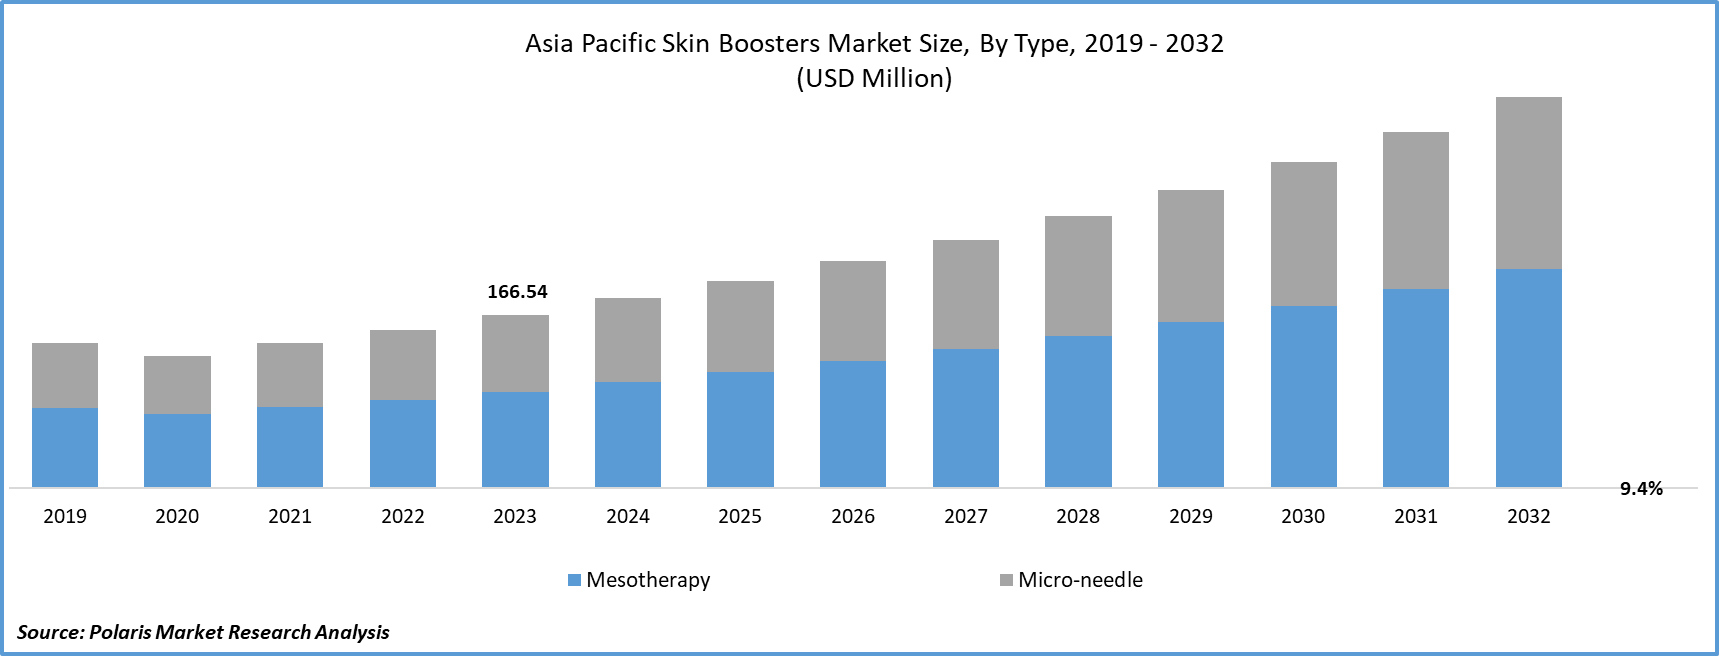 Asia Pacific Skin Boosters Market Size